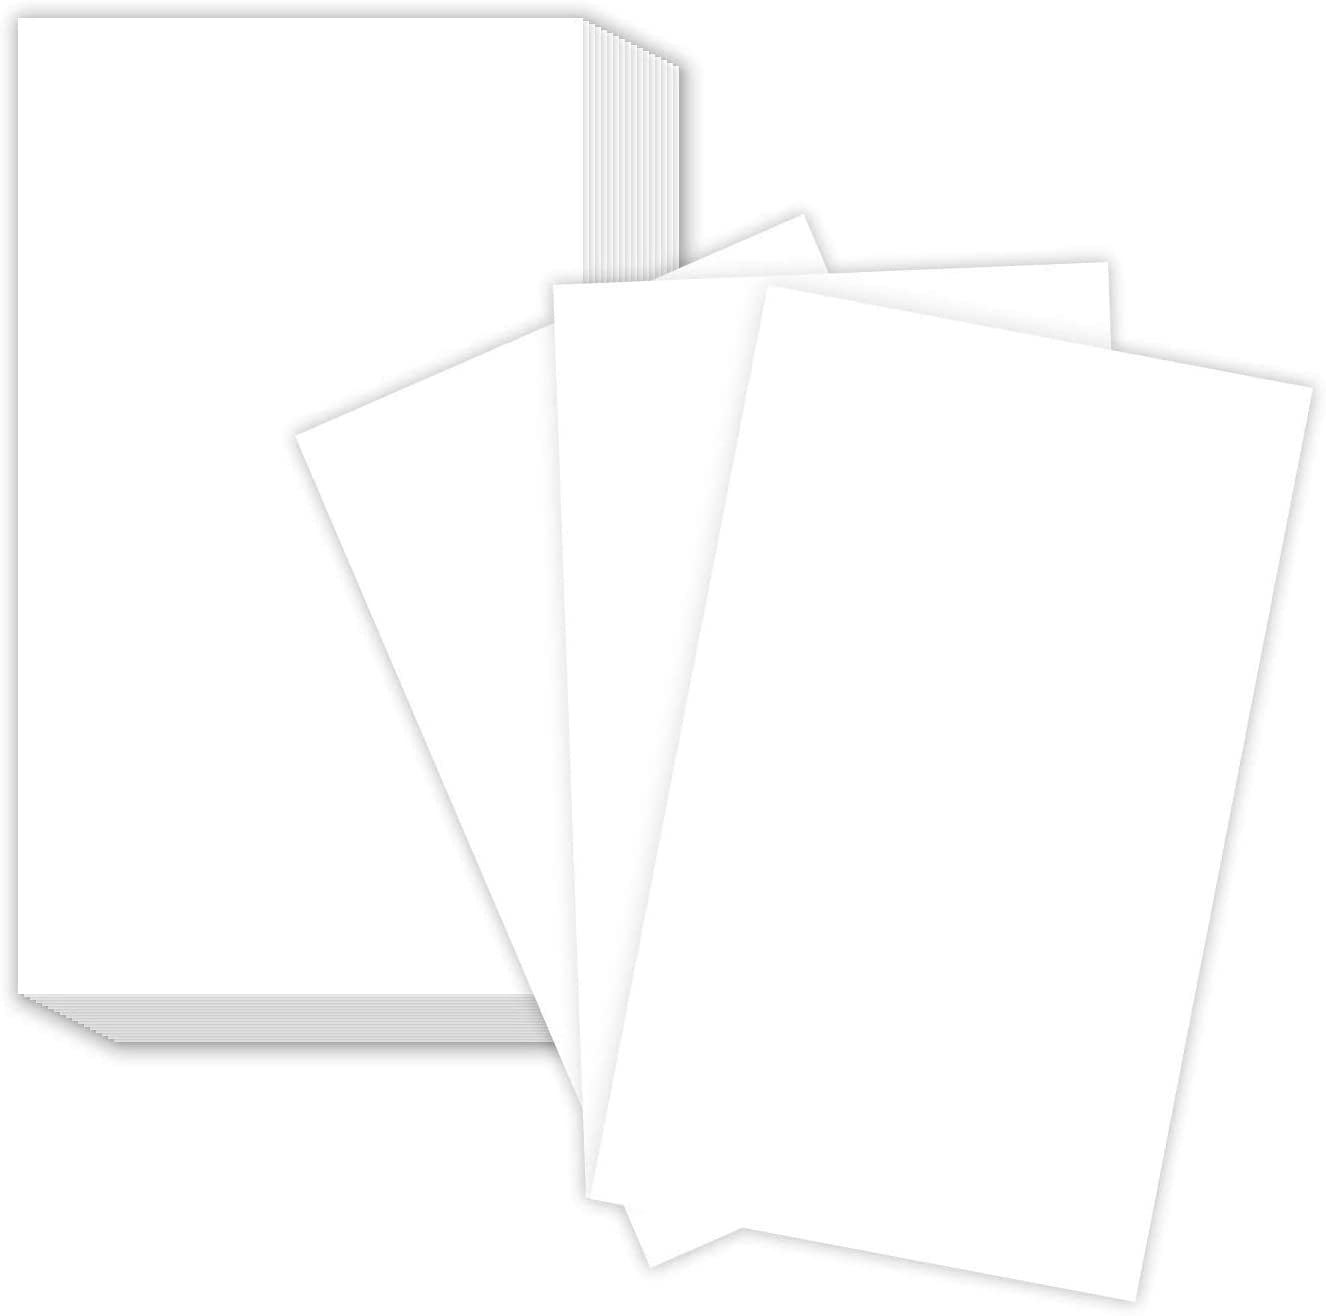 Hamilco White Resume Linen Textured Cardstock Paper – 8 1/2 x 11 Blank Thick Heavy Weight 80 lb Cover Card Stock for Printer - 50 Pack (Bright White)